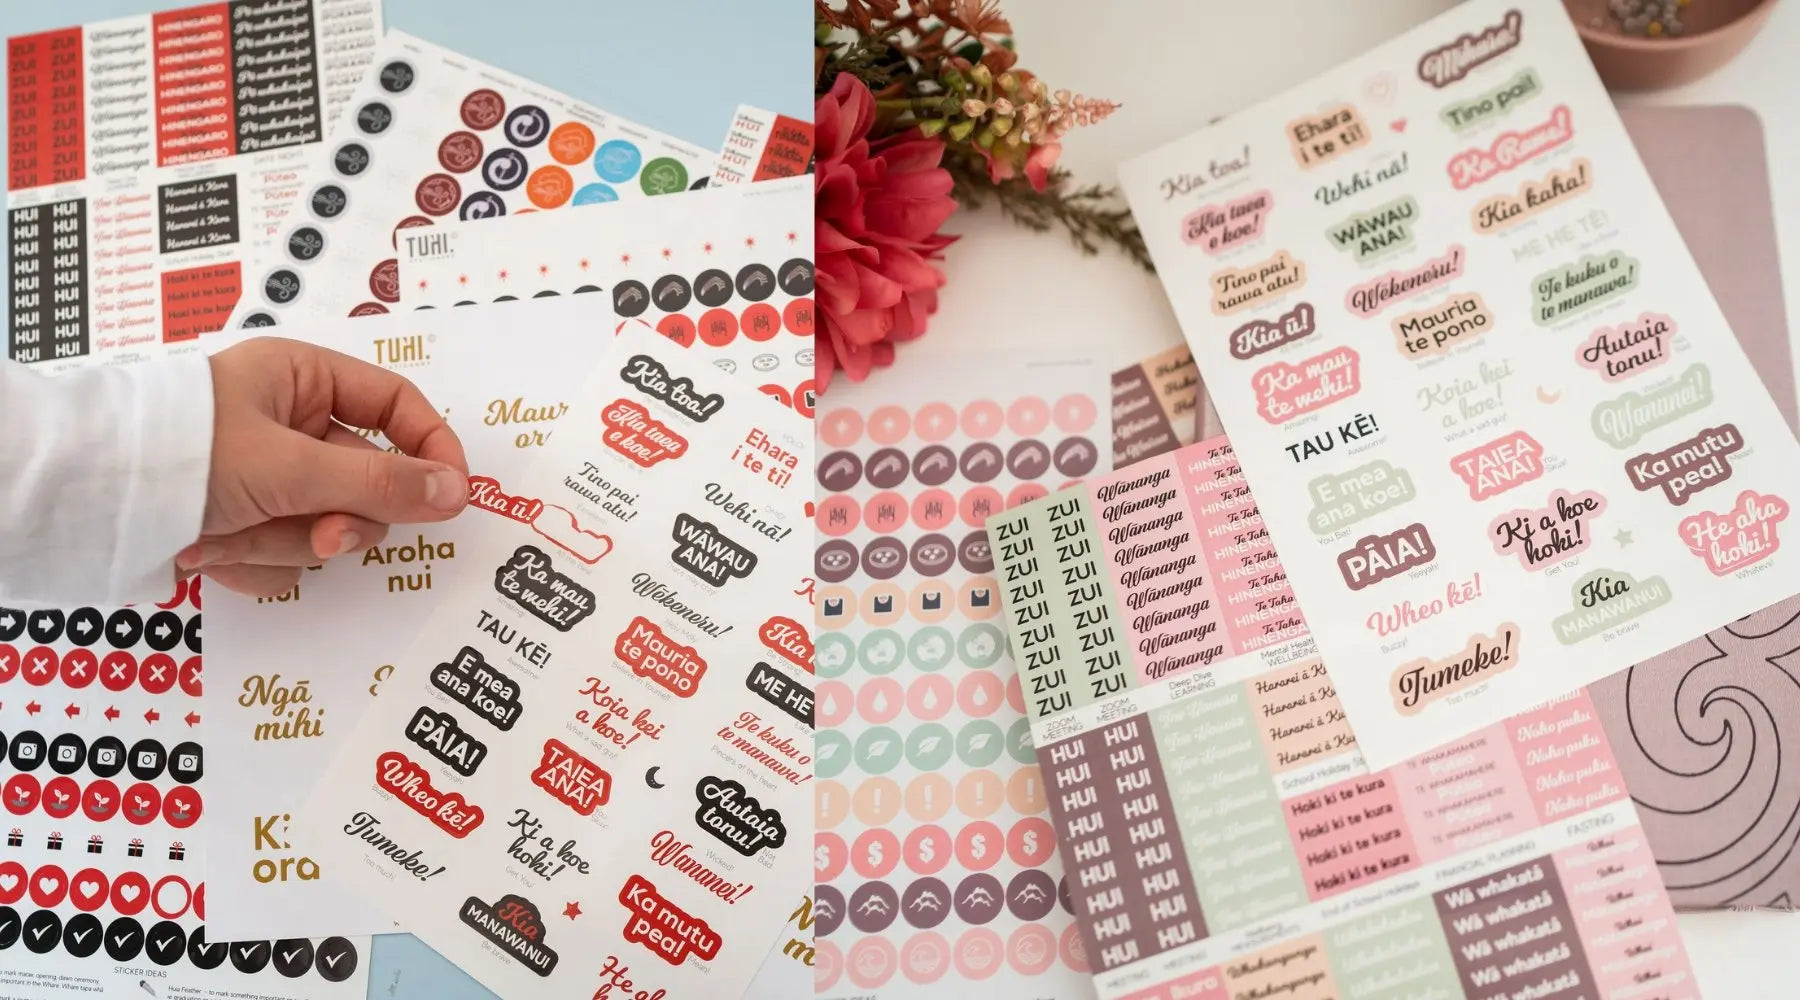 Stickers-are-not-just-for-kids Tuhi Stationery Ltd